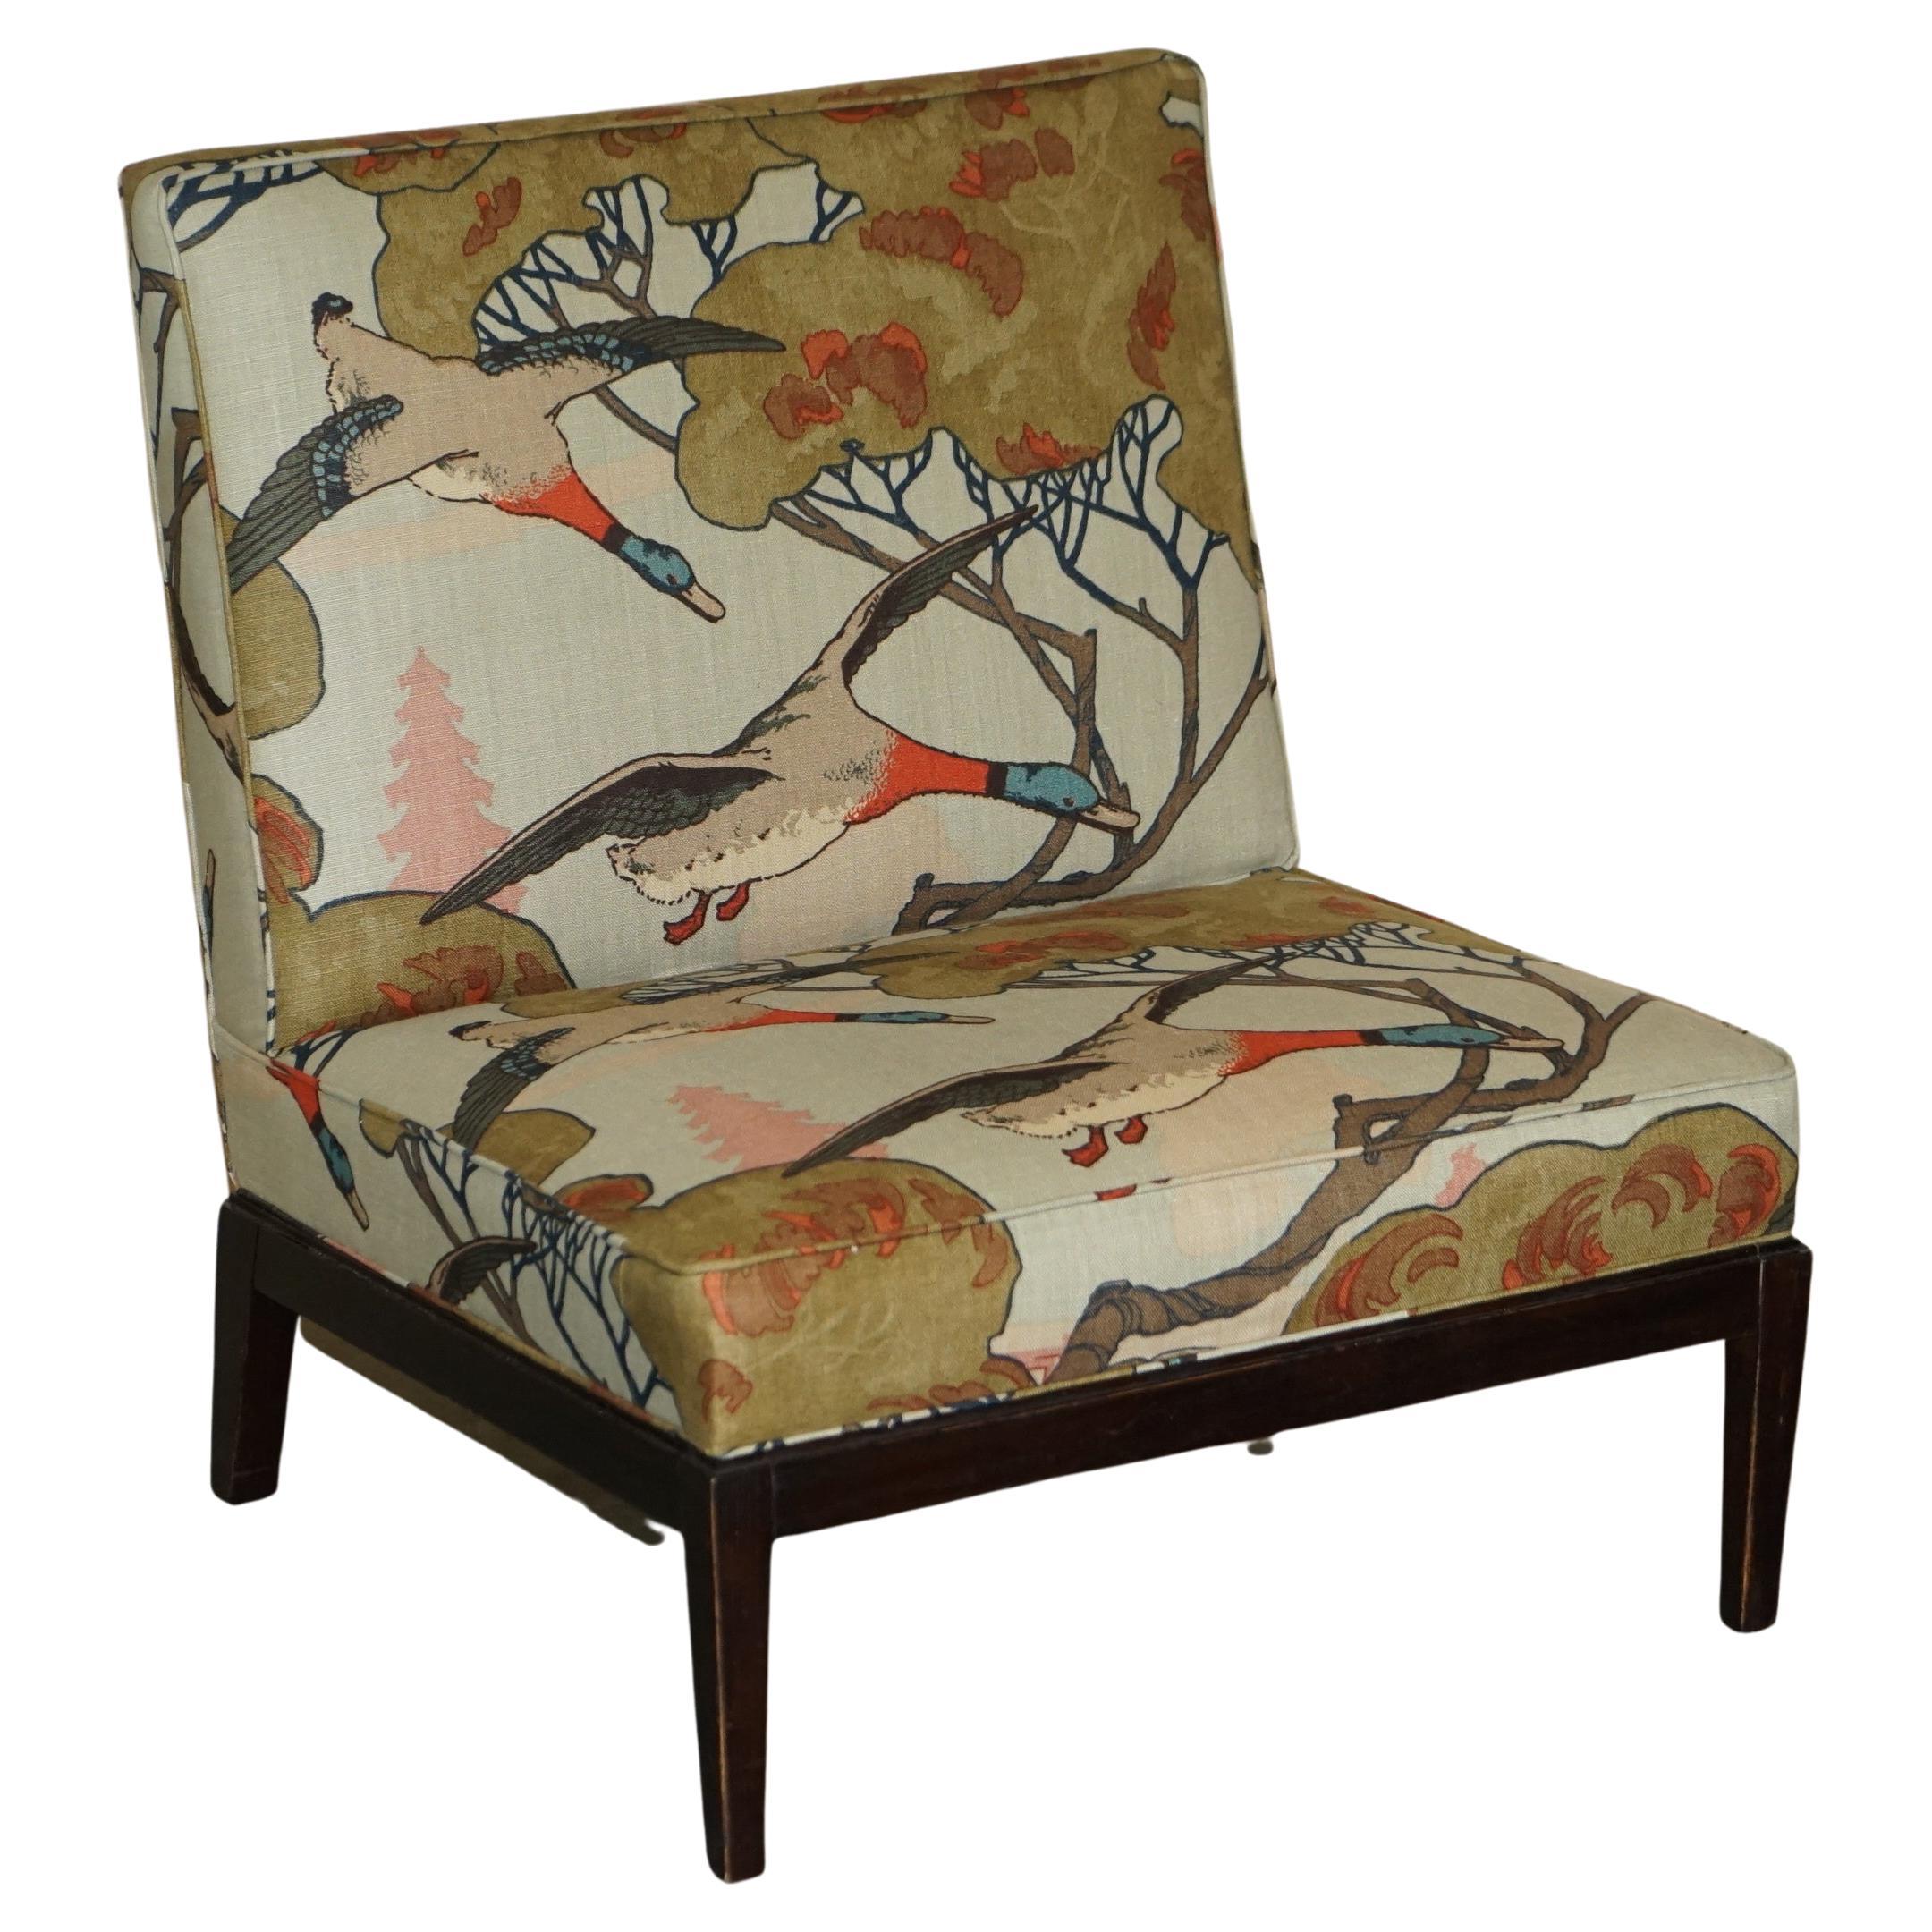 New Fabric George Smith Norris Armchair in Mulberry Flying Ducks Upholstery For Sale